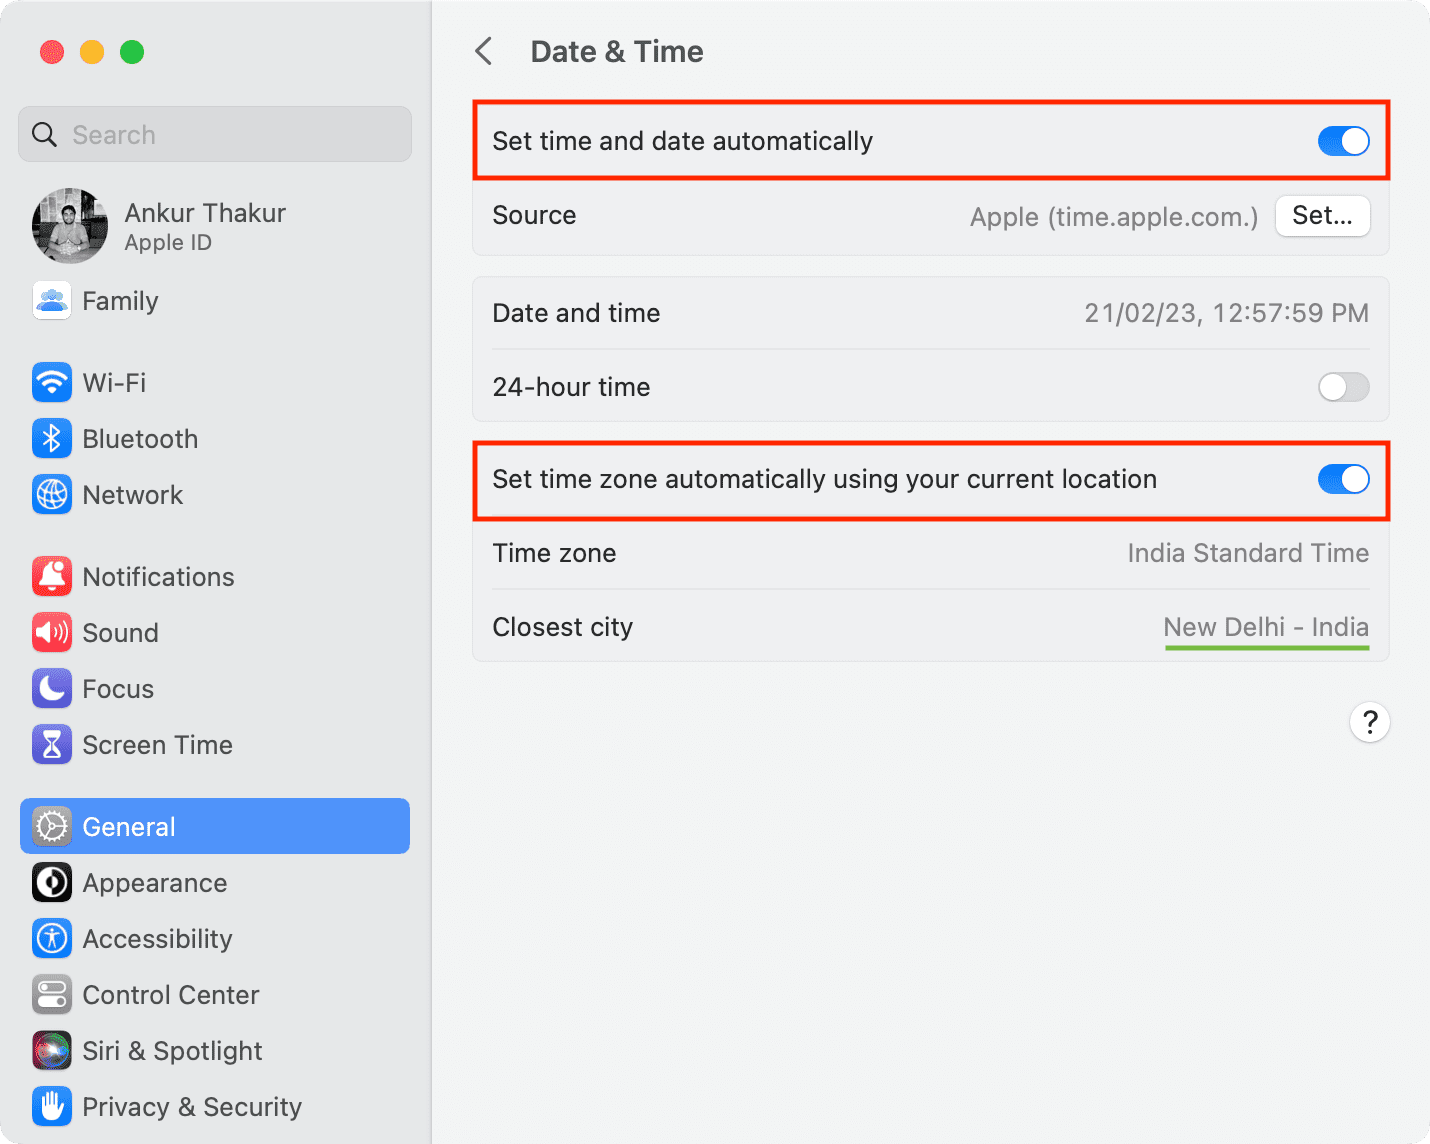 Open System Preferences from the Apple menu
Select Date & Time and ensure "Set date and time automatically" is enabled